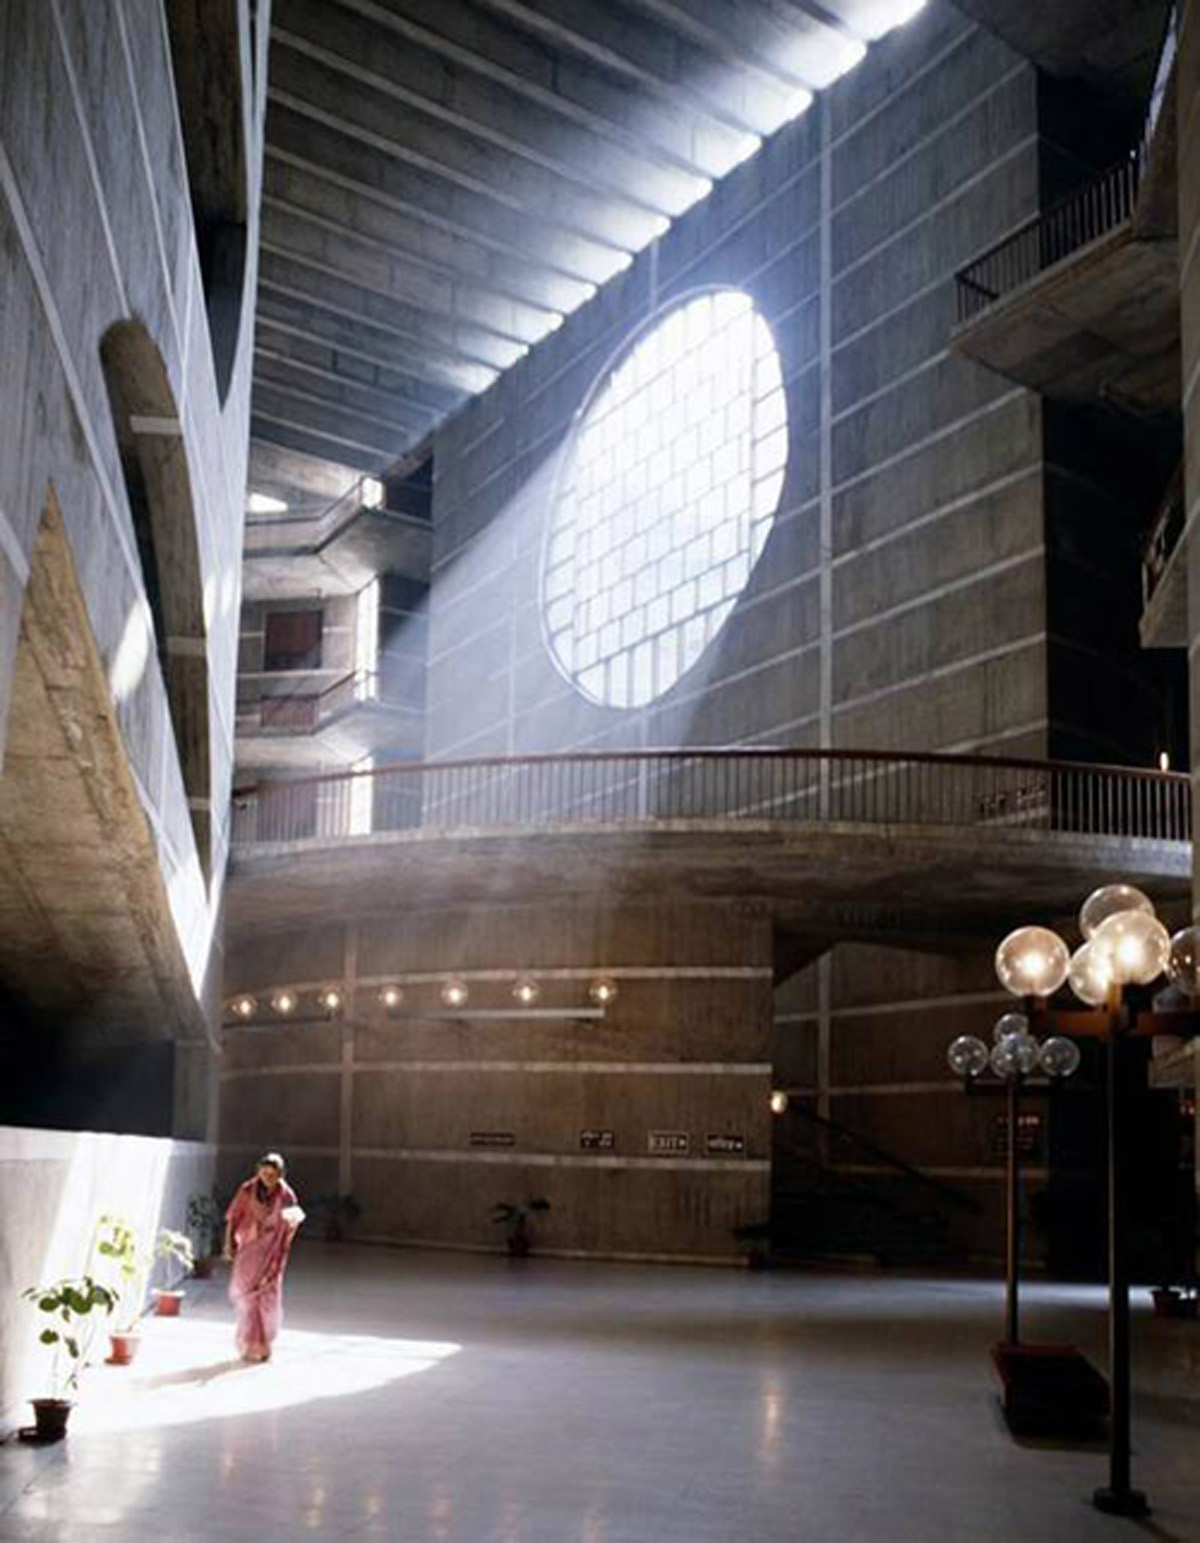 Visions of a Coming City: William Whitaker on Louis Kahn's Legacy